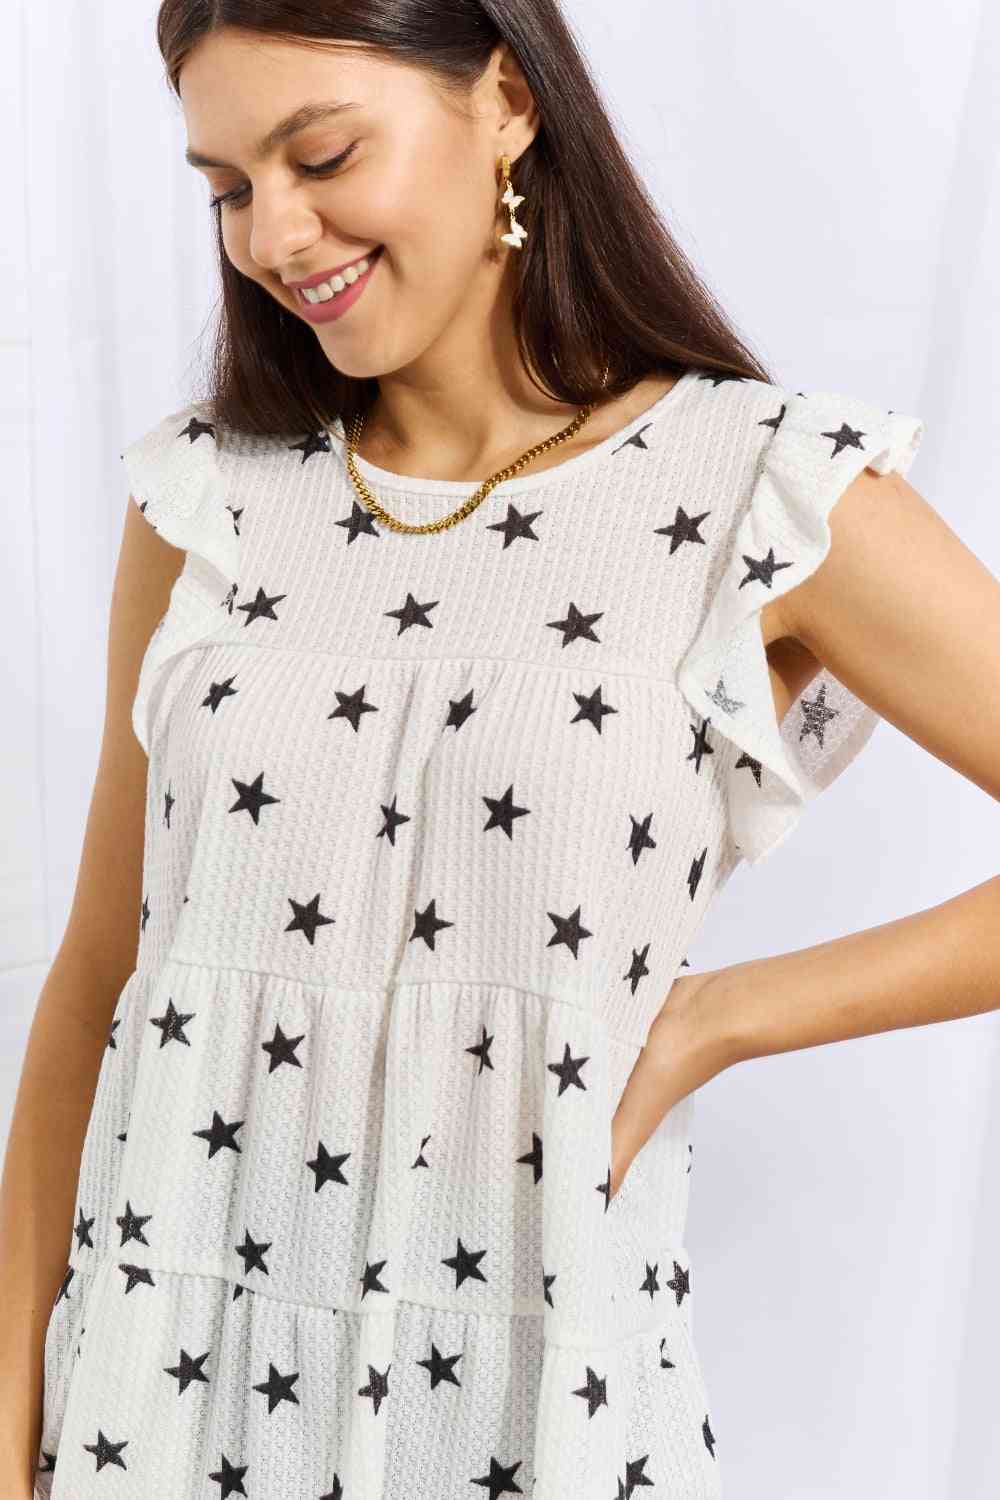 Reach For The Stars Top